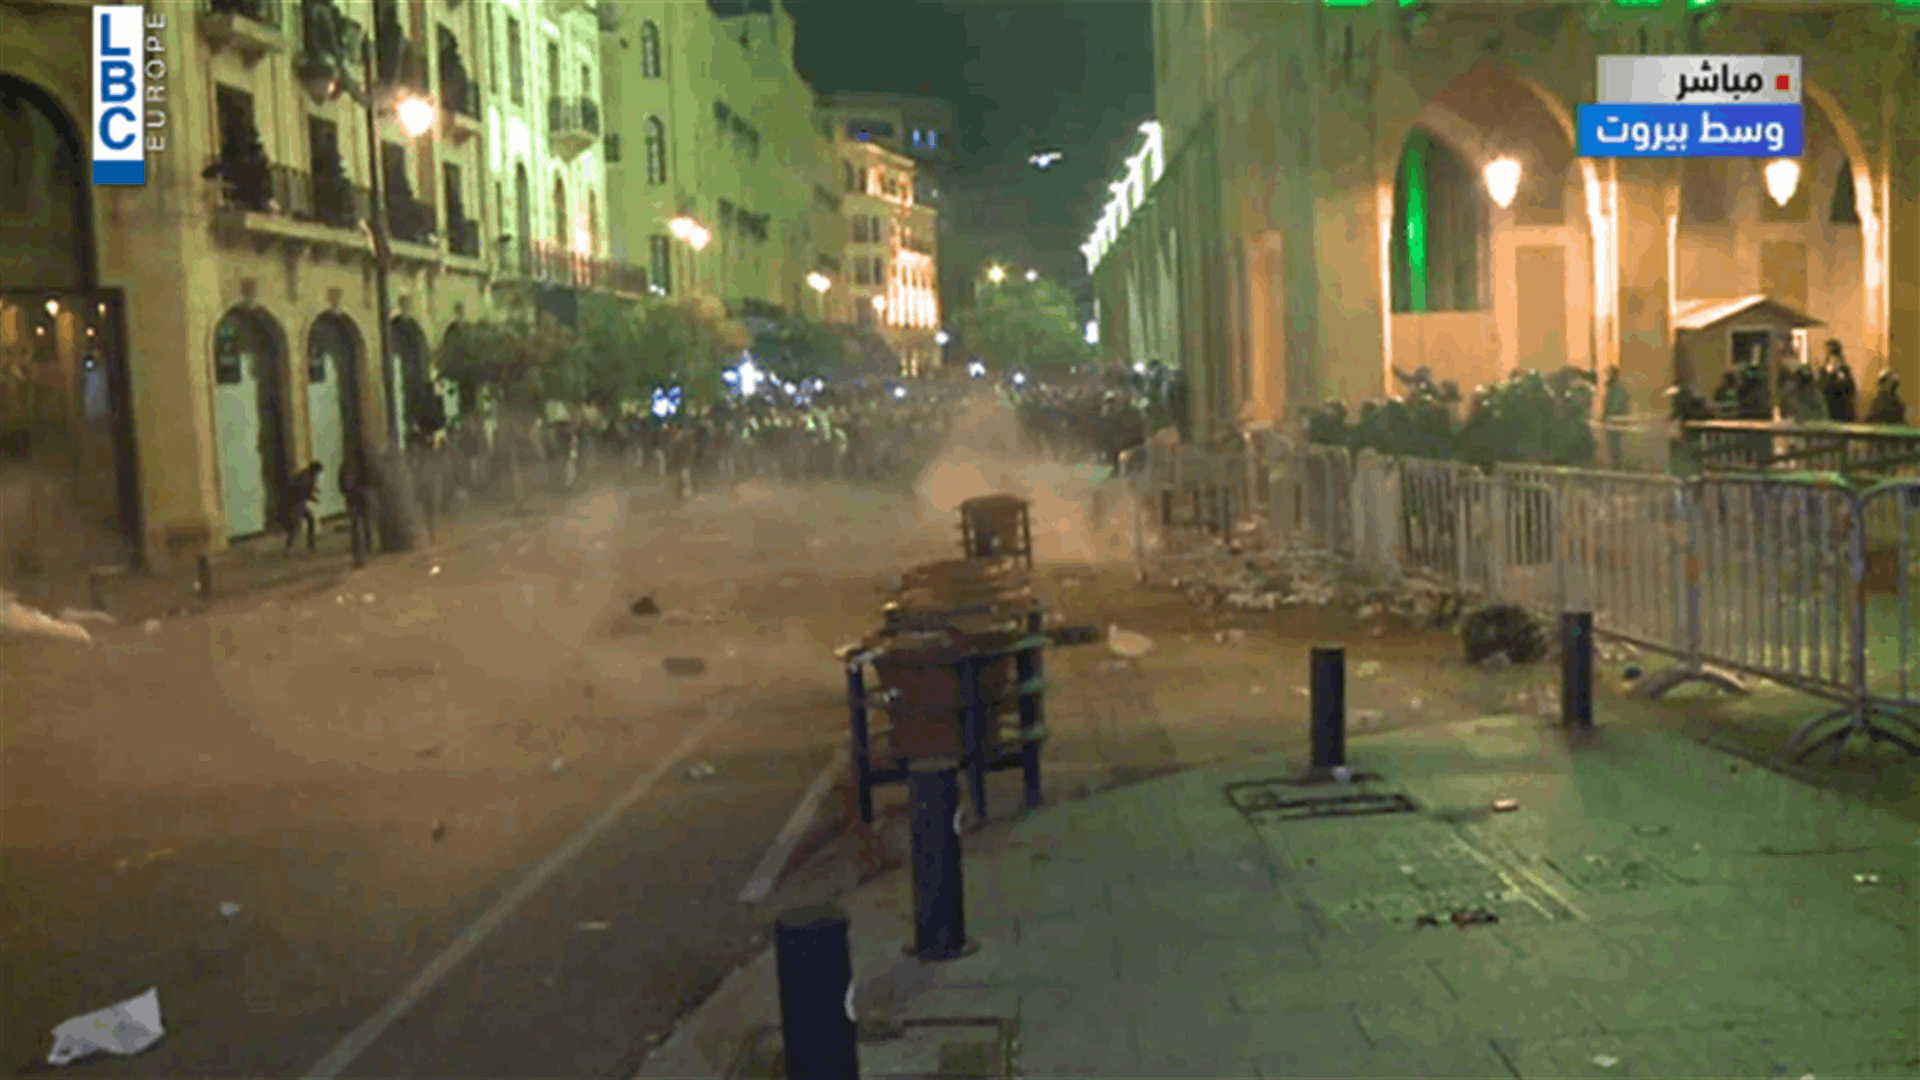 Tension renews in central Beirut as security forces fire tear gas to disperse protesters (Video)